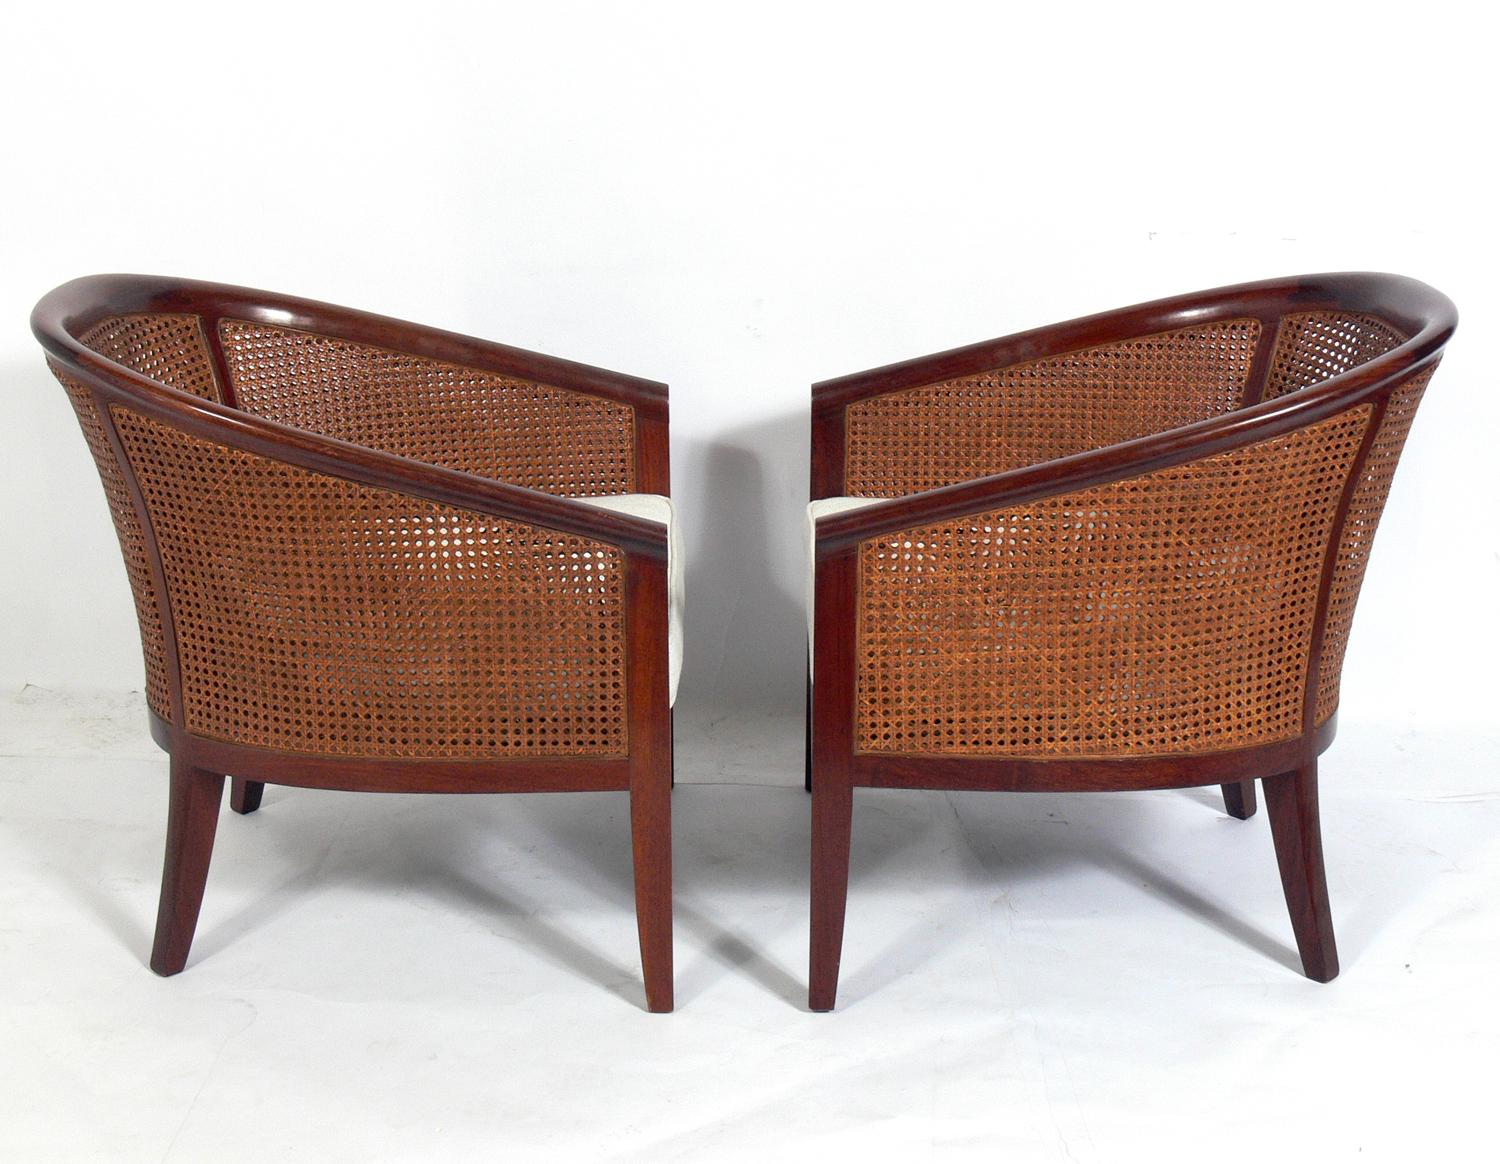 Pair of elegant caned back lounge chairs, circa 1960s. They have been reupholstered in an ivory color herringbone upholstery.